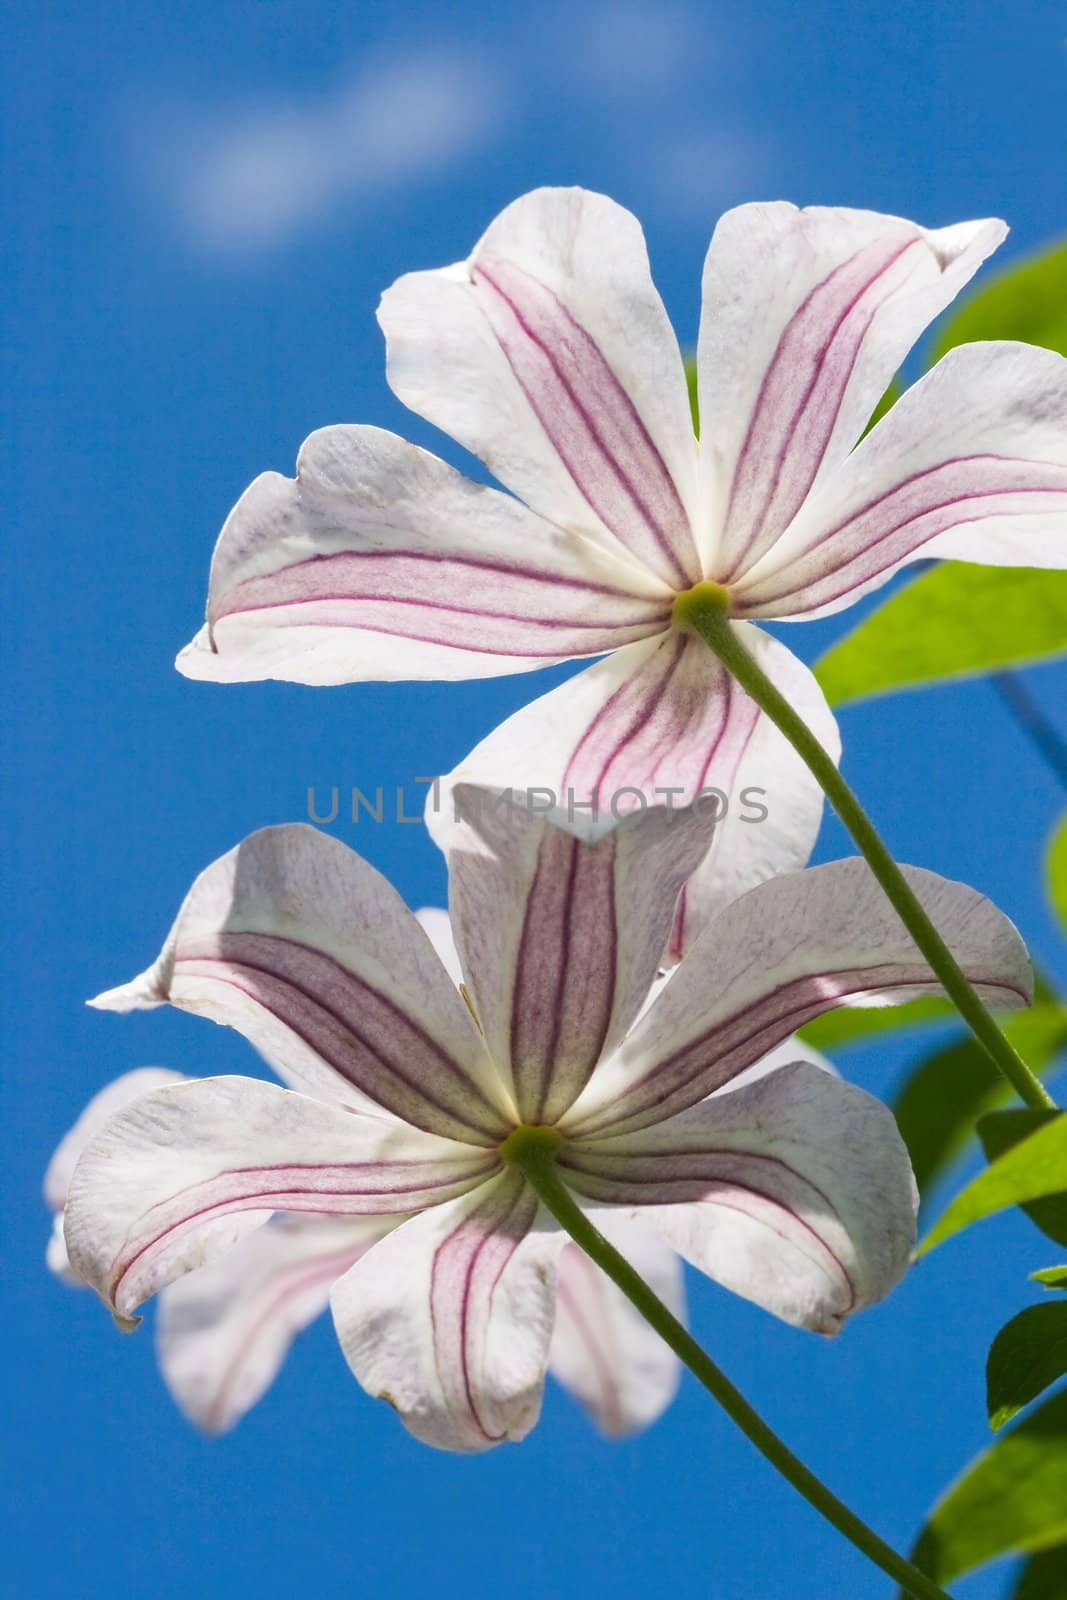 Clematis flowers on blue by Colette